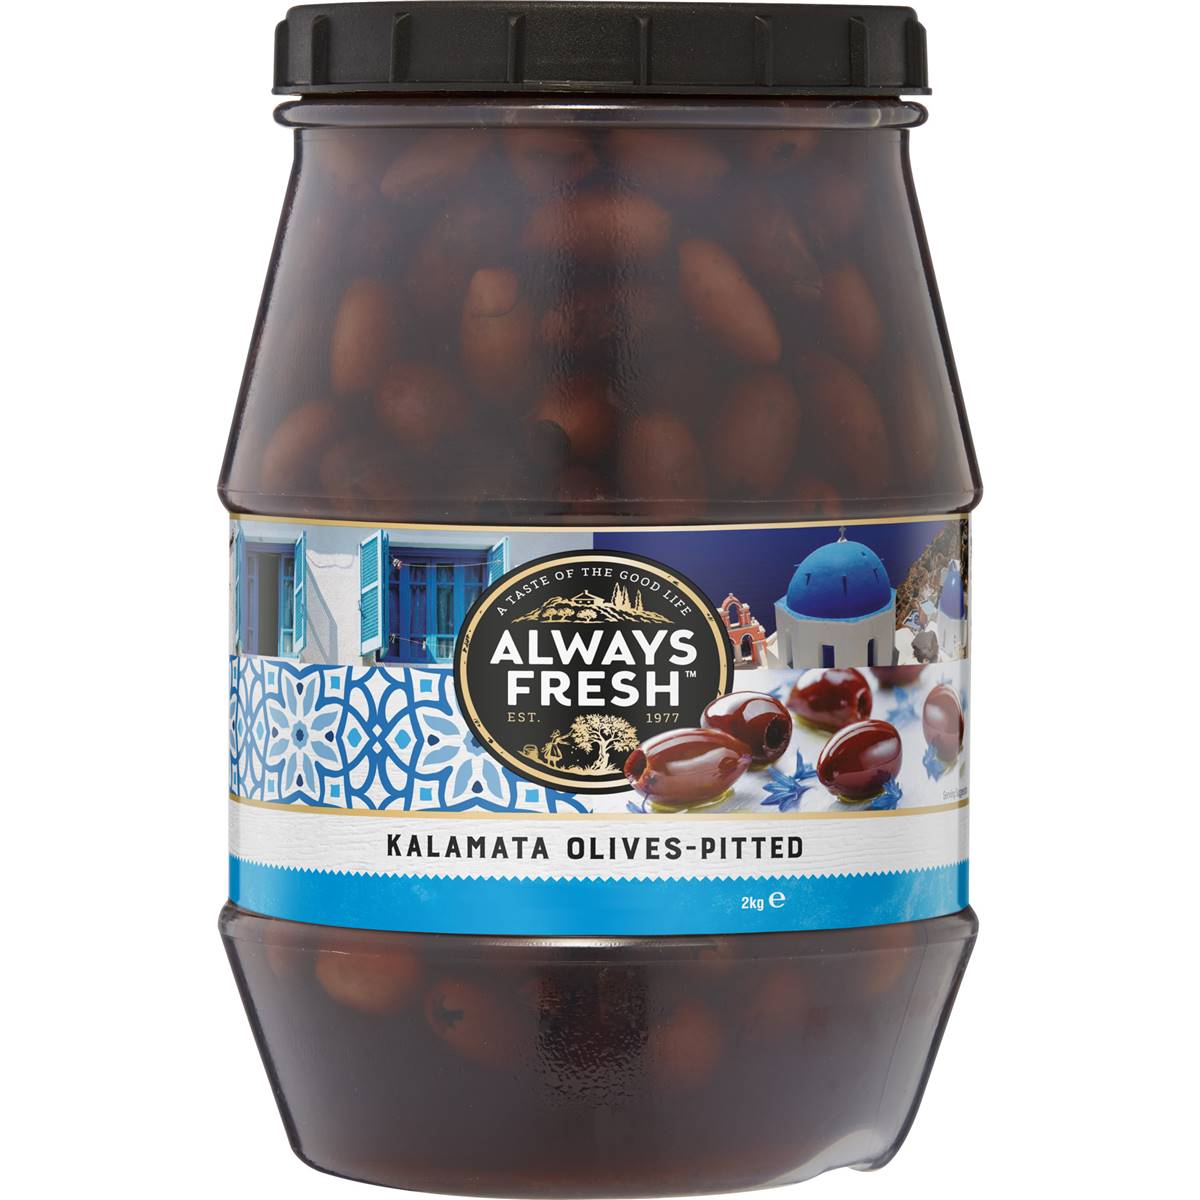 Calories in Always Fresh Olives Pitted Kalamata